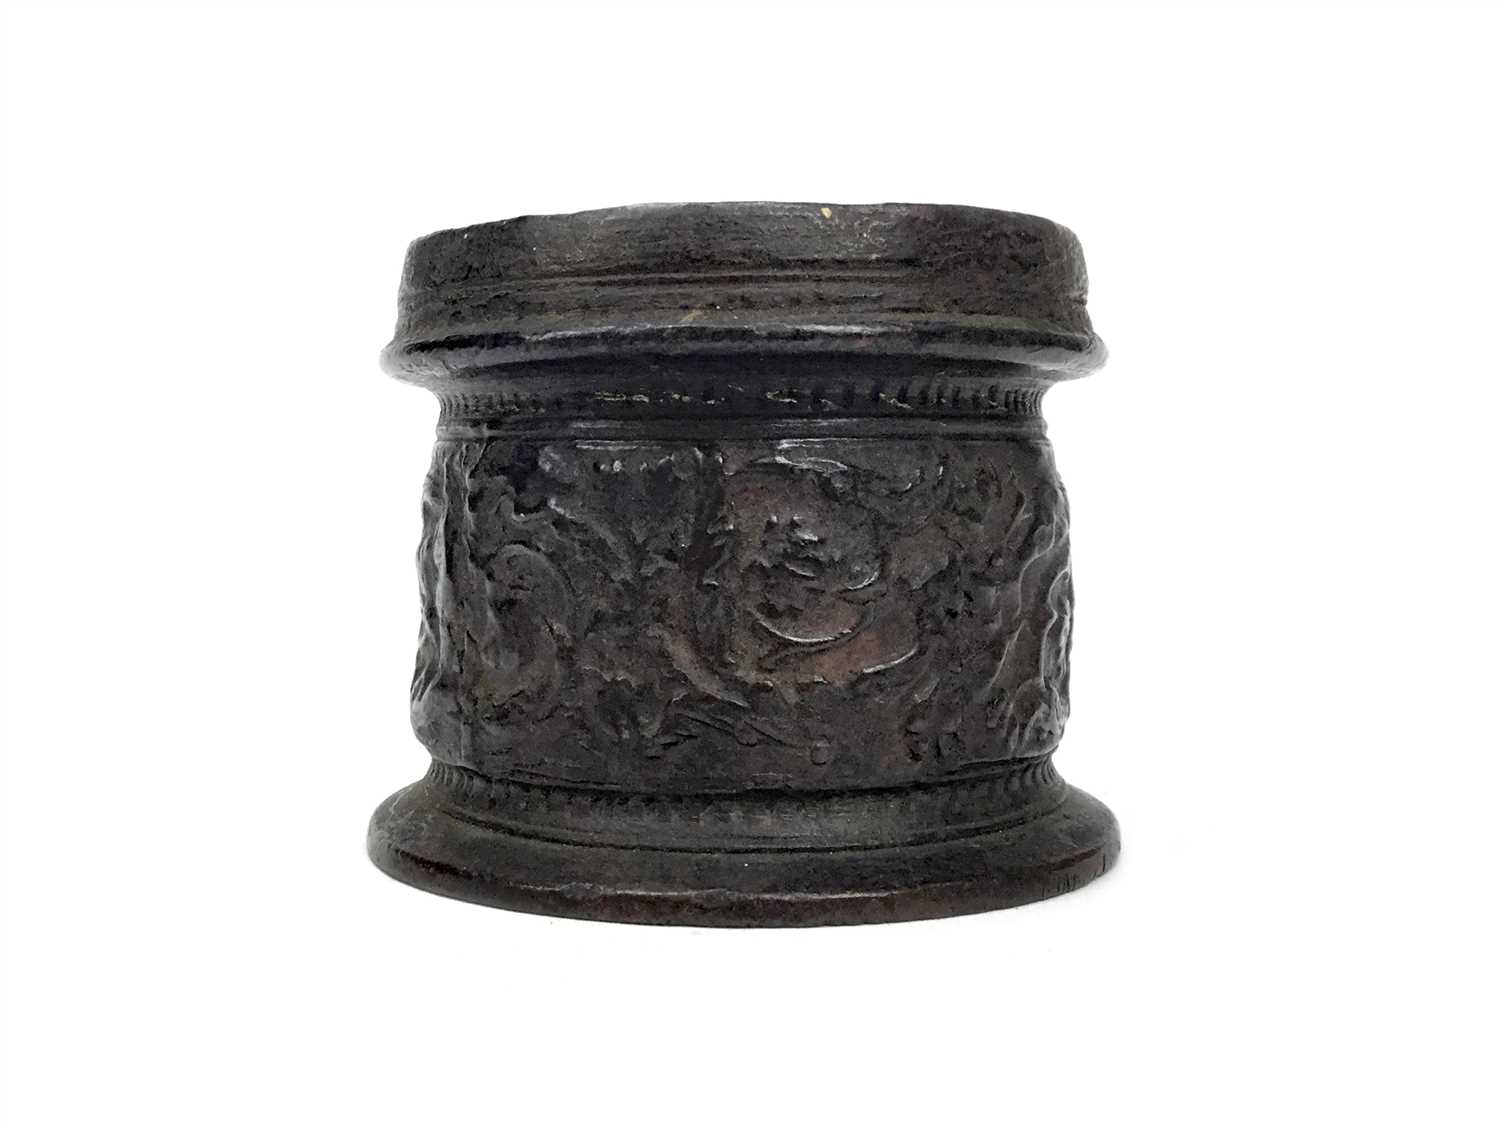 Lot 874 - A SMALL BRONZE CYLINDRICAL POT OF ARCHAIC DESIGN